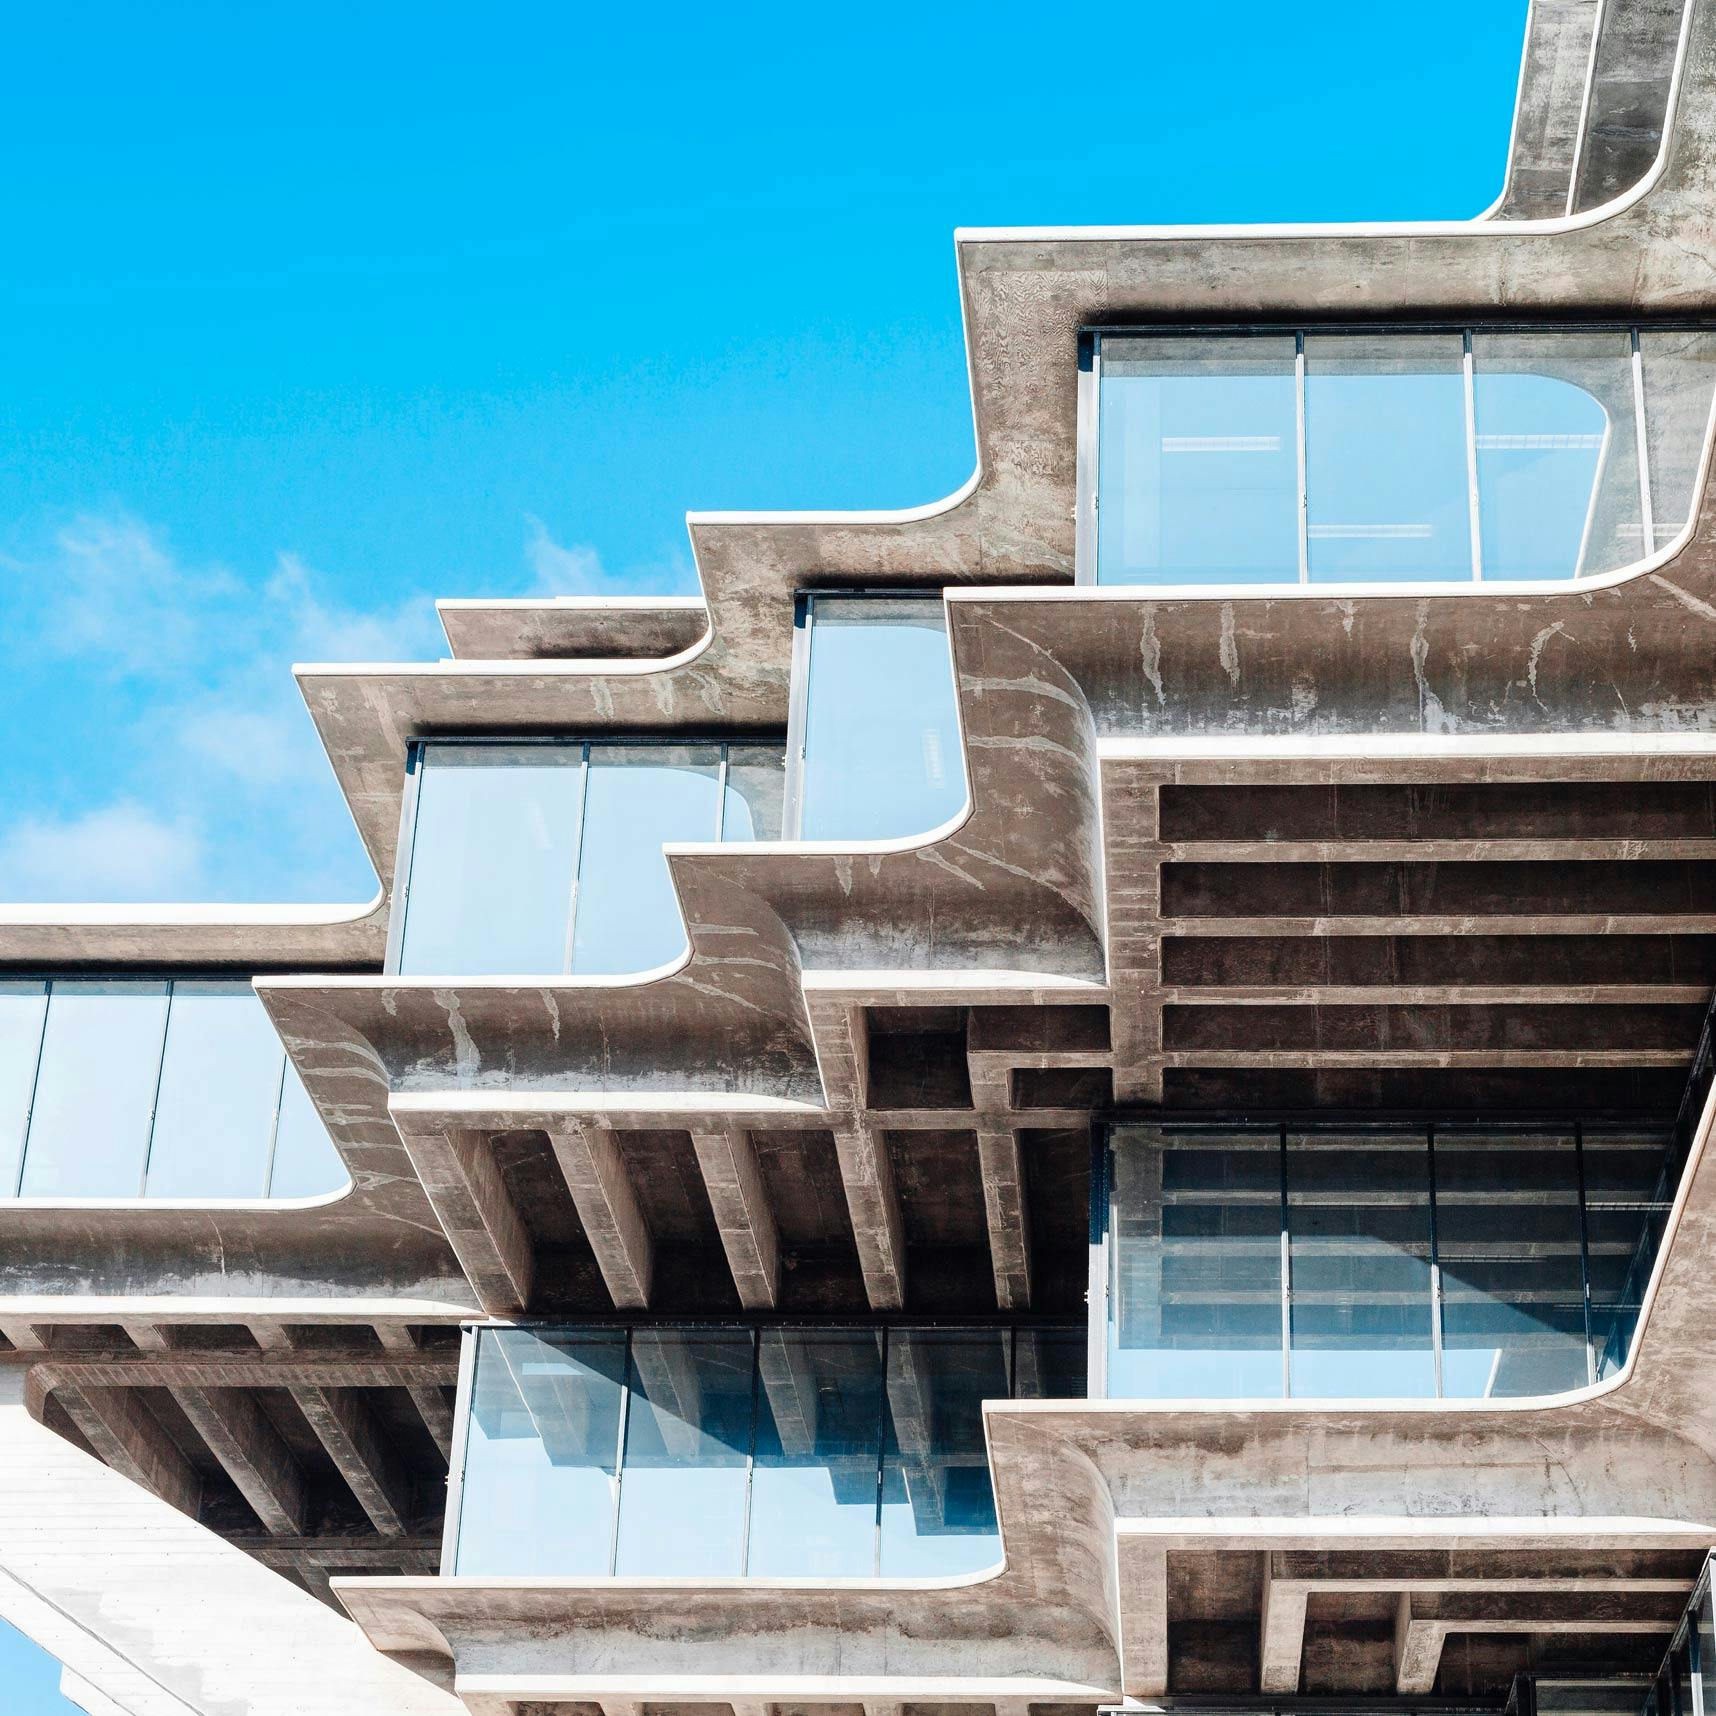 Geisel Library at the University of California San Diego